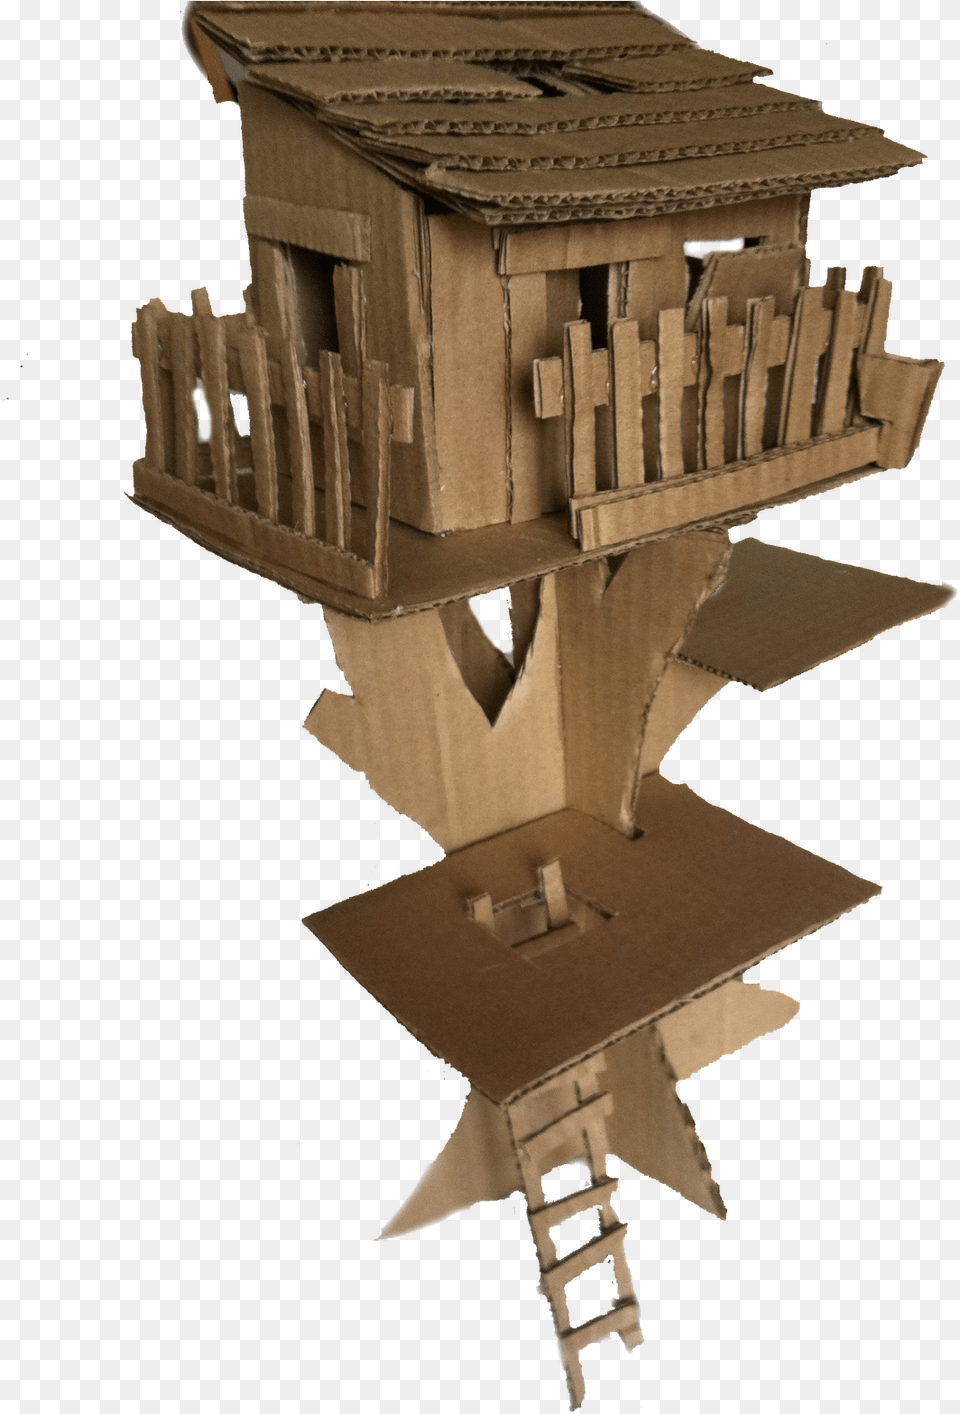 My Tree House Cardboard Tree House Model, Plywood, Wood, Architecture, Building Free Png